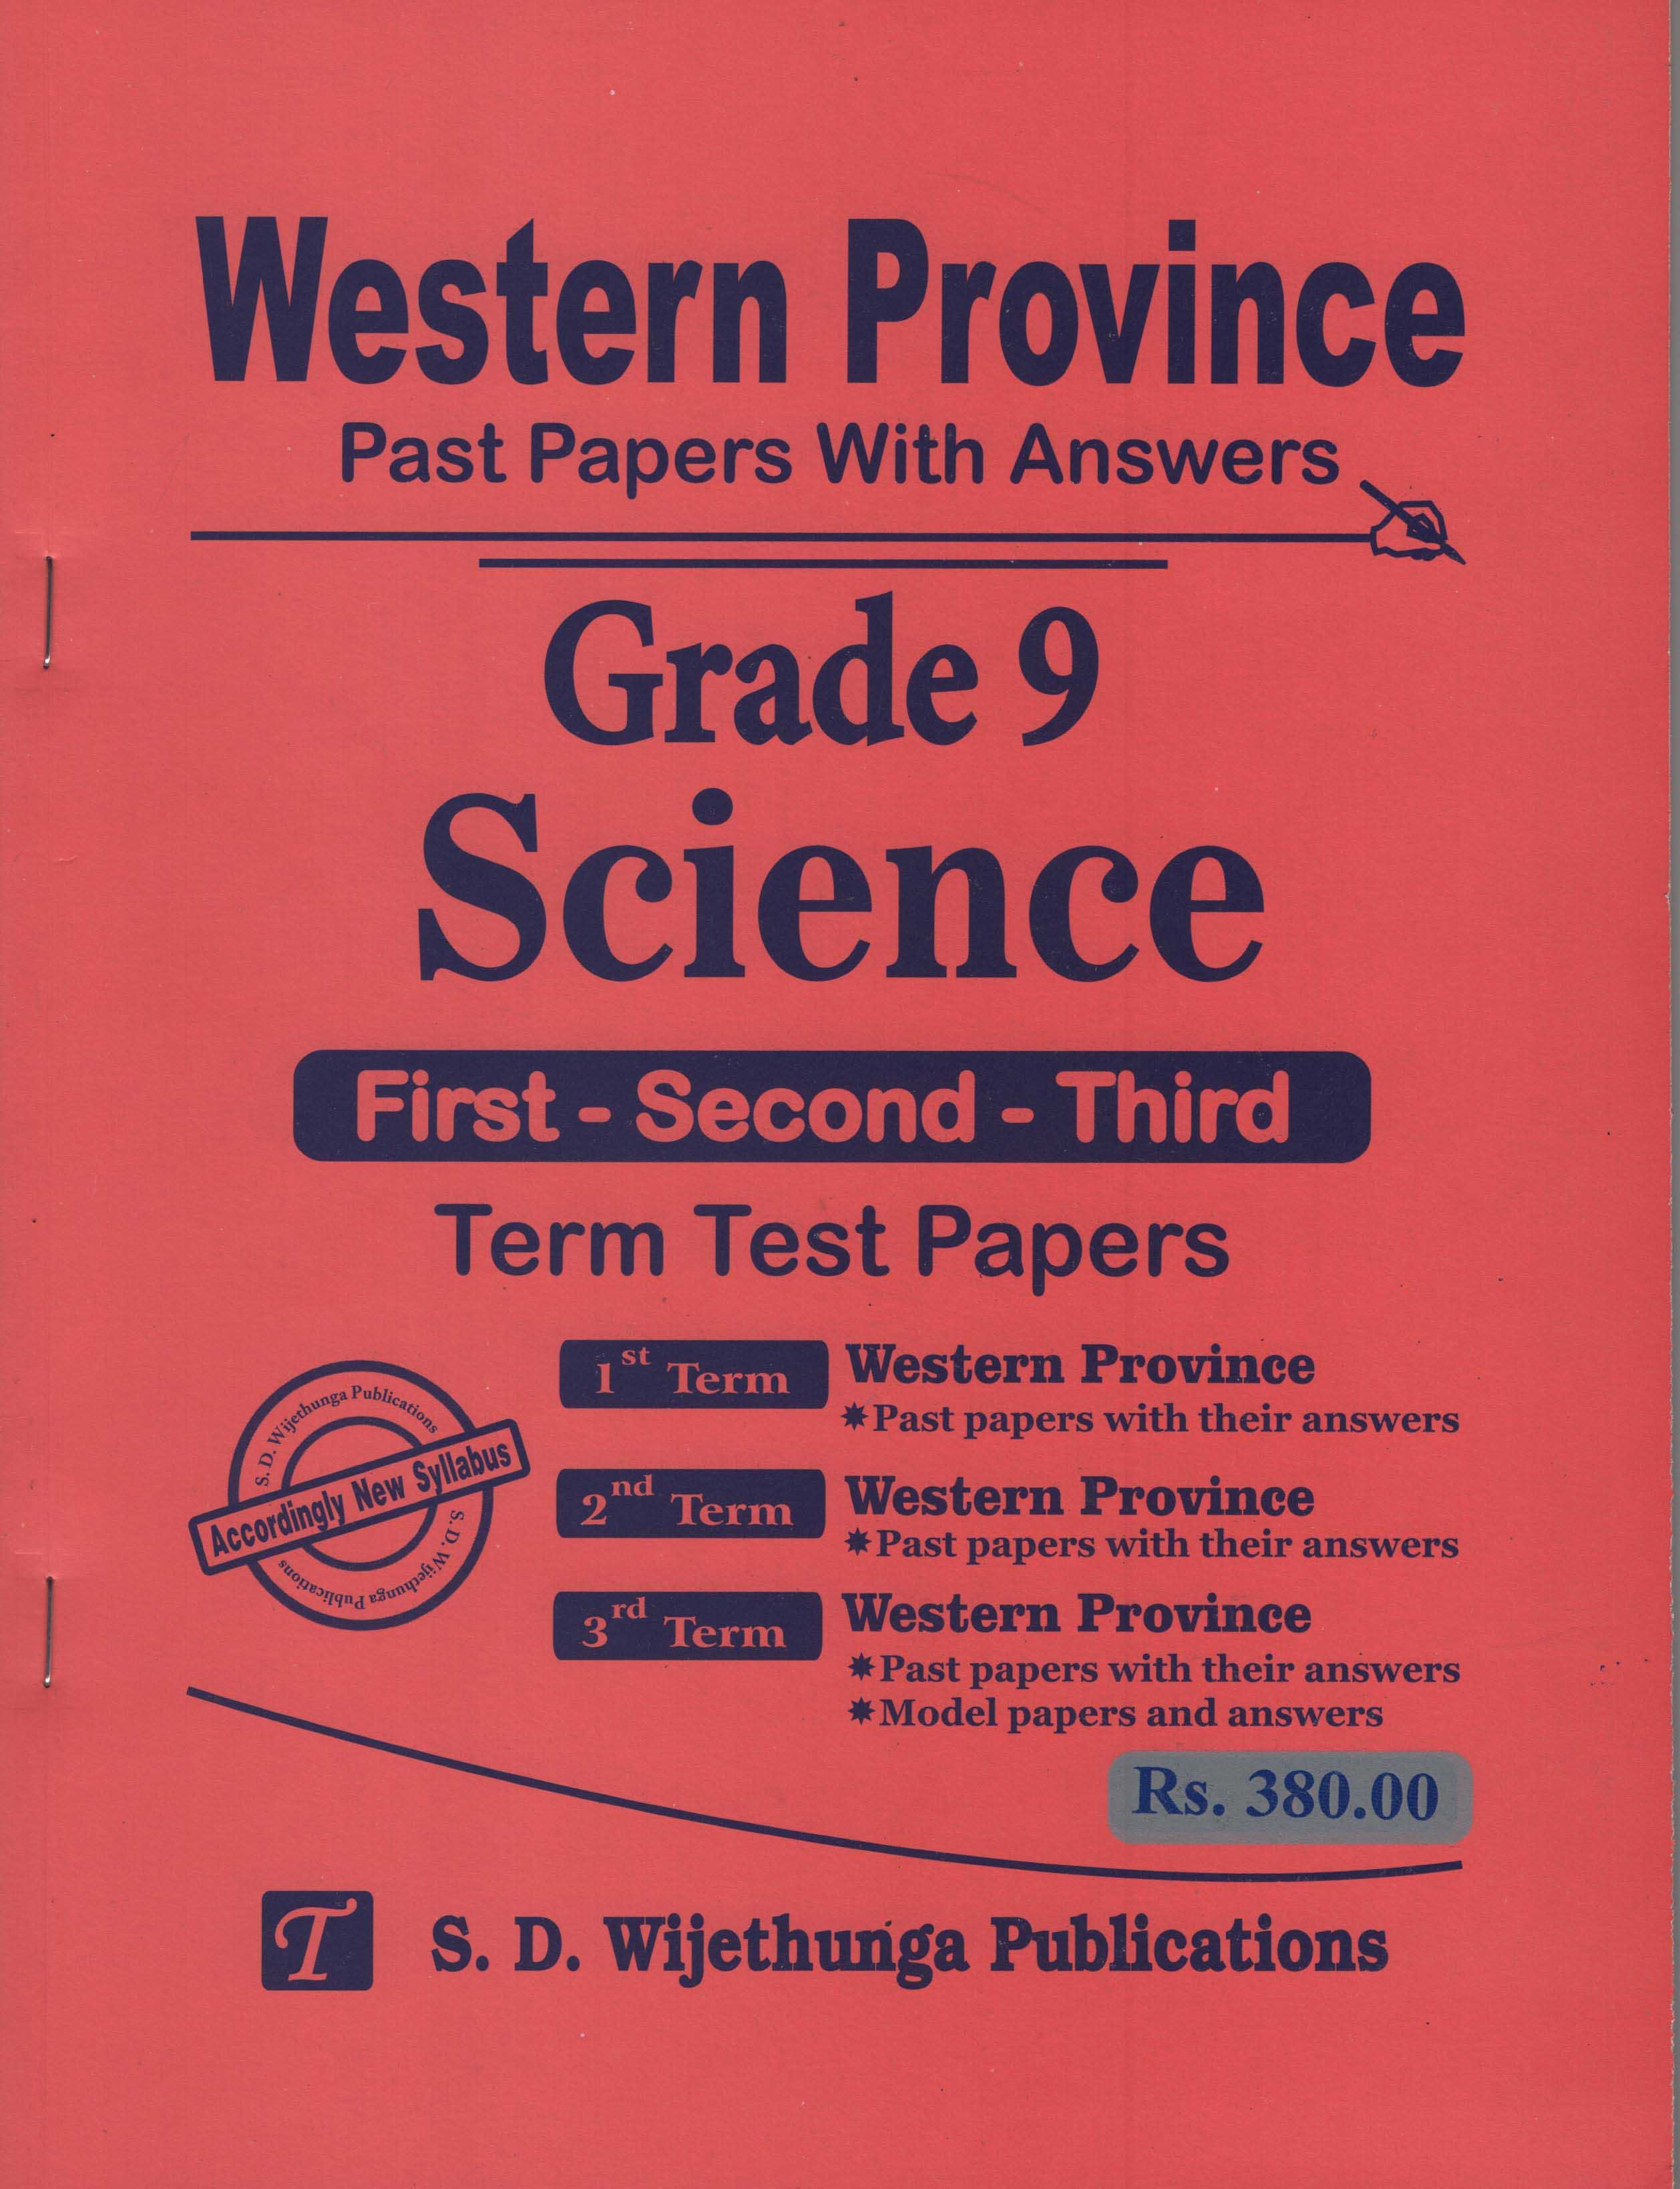 Western Province Past Papers with Answers Grade 9 Science (First-Second-Third) Term Test Papers